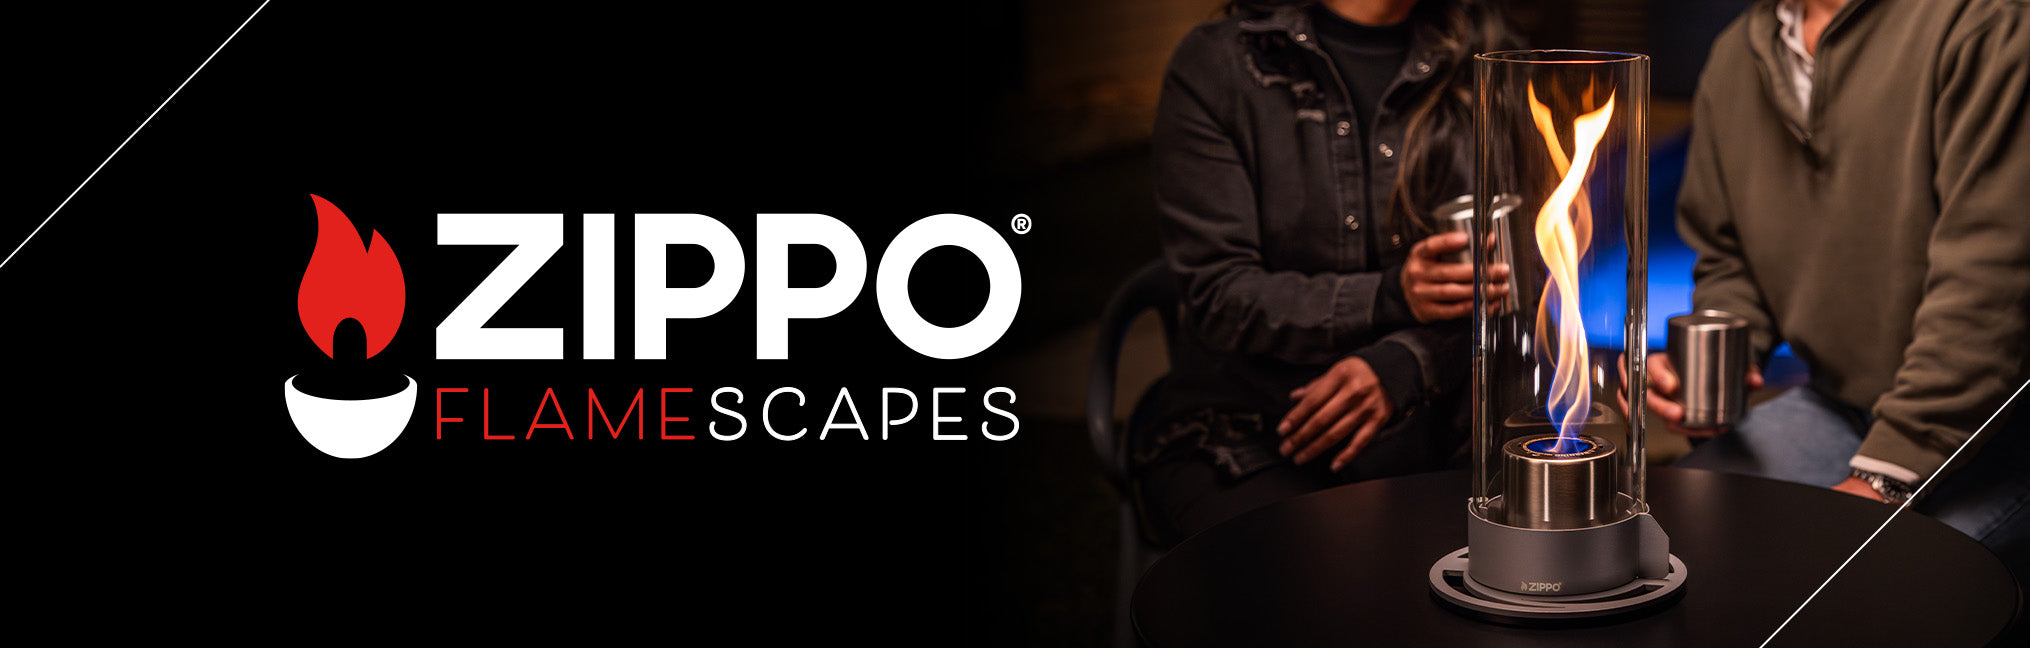 Banner for the Zippo FlameScapes™ collection